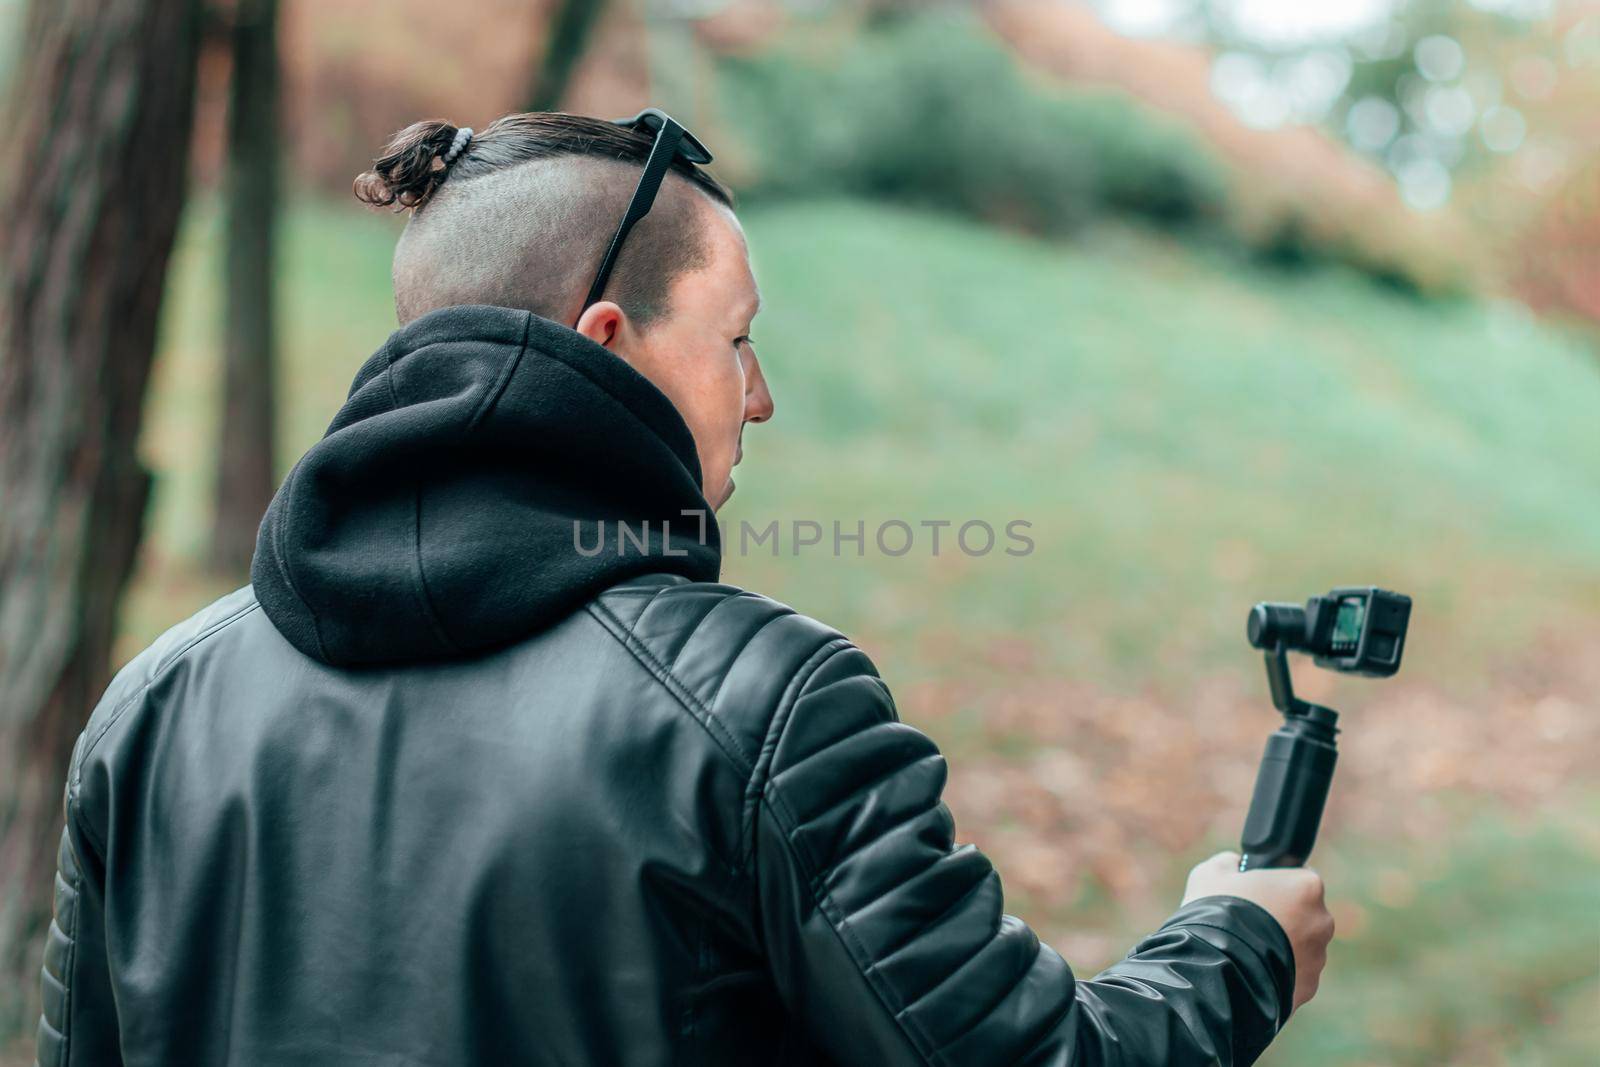 Blogger in Black Clothes and Sunglasses Making Video Using Action Camera with Gimbal Camera Stabilizer in Autumn Park